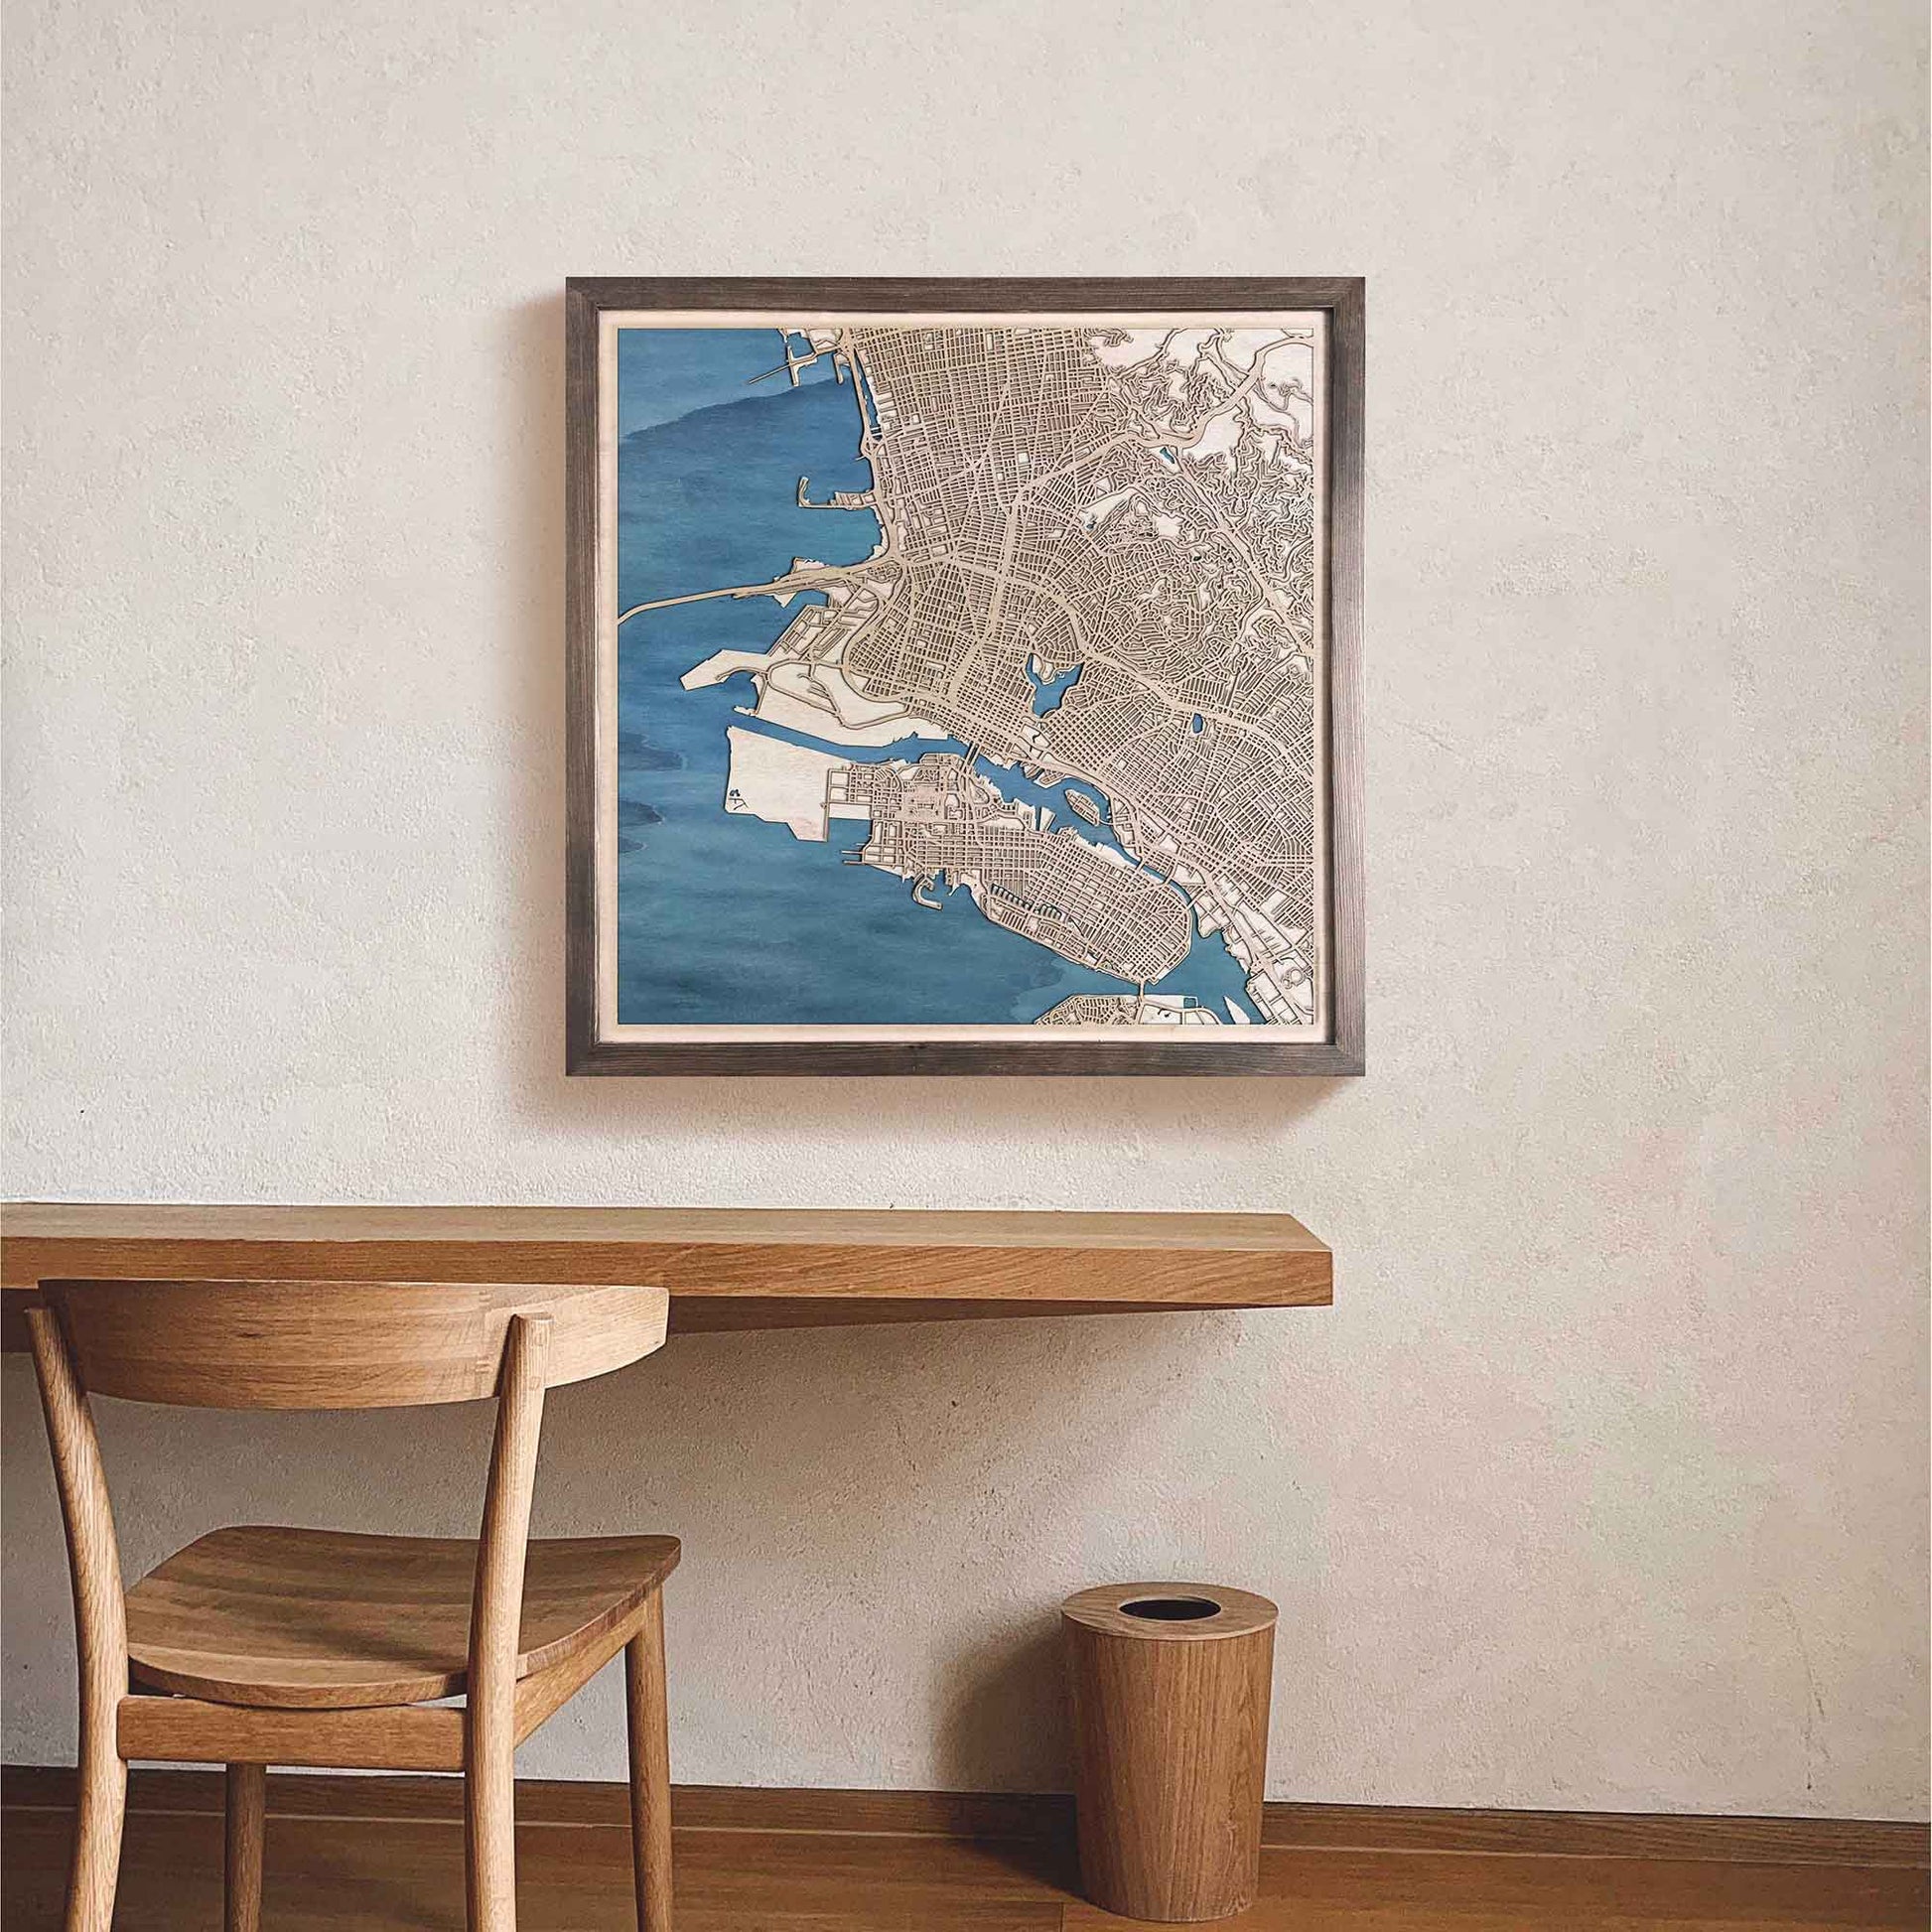 Oakland Wooden Map by CityWood - Custom Wood Map Art - Unique Laser Cut Engraved - Anniversary Gift